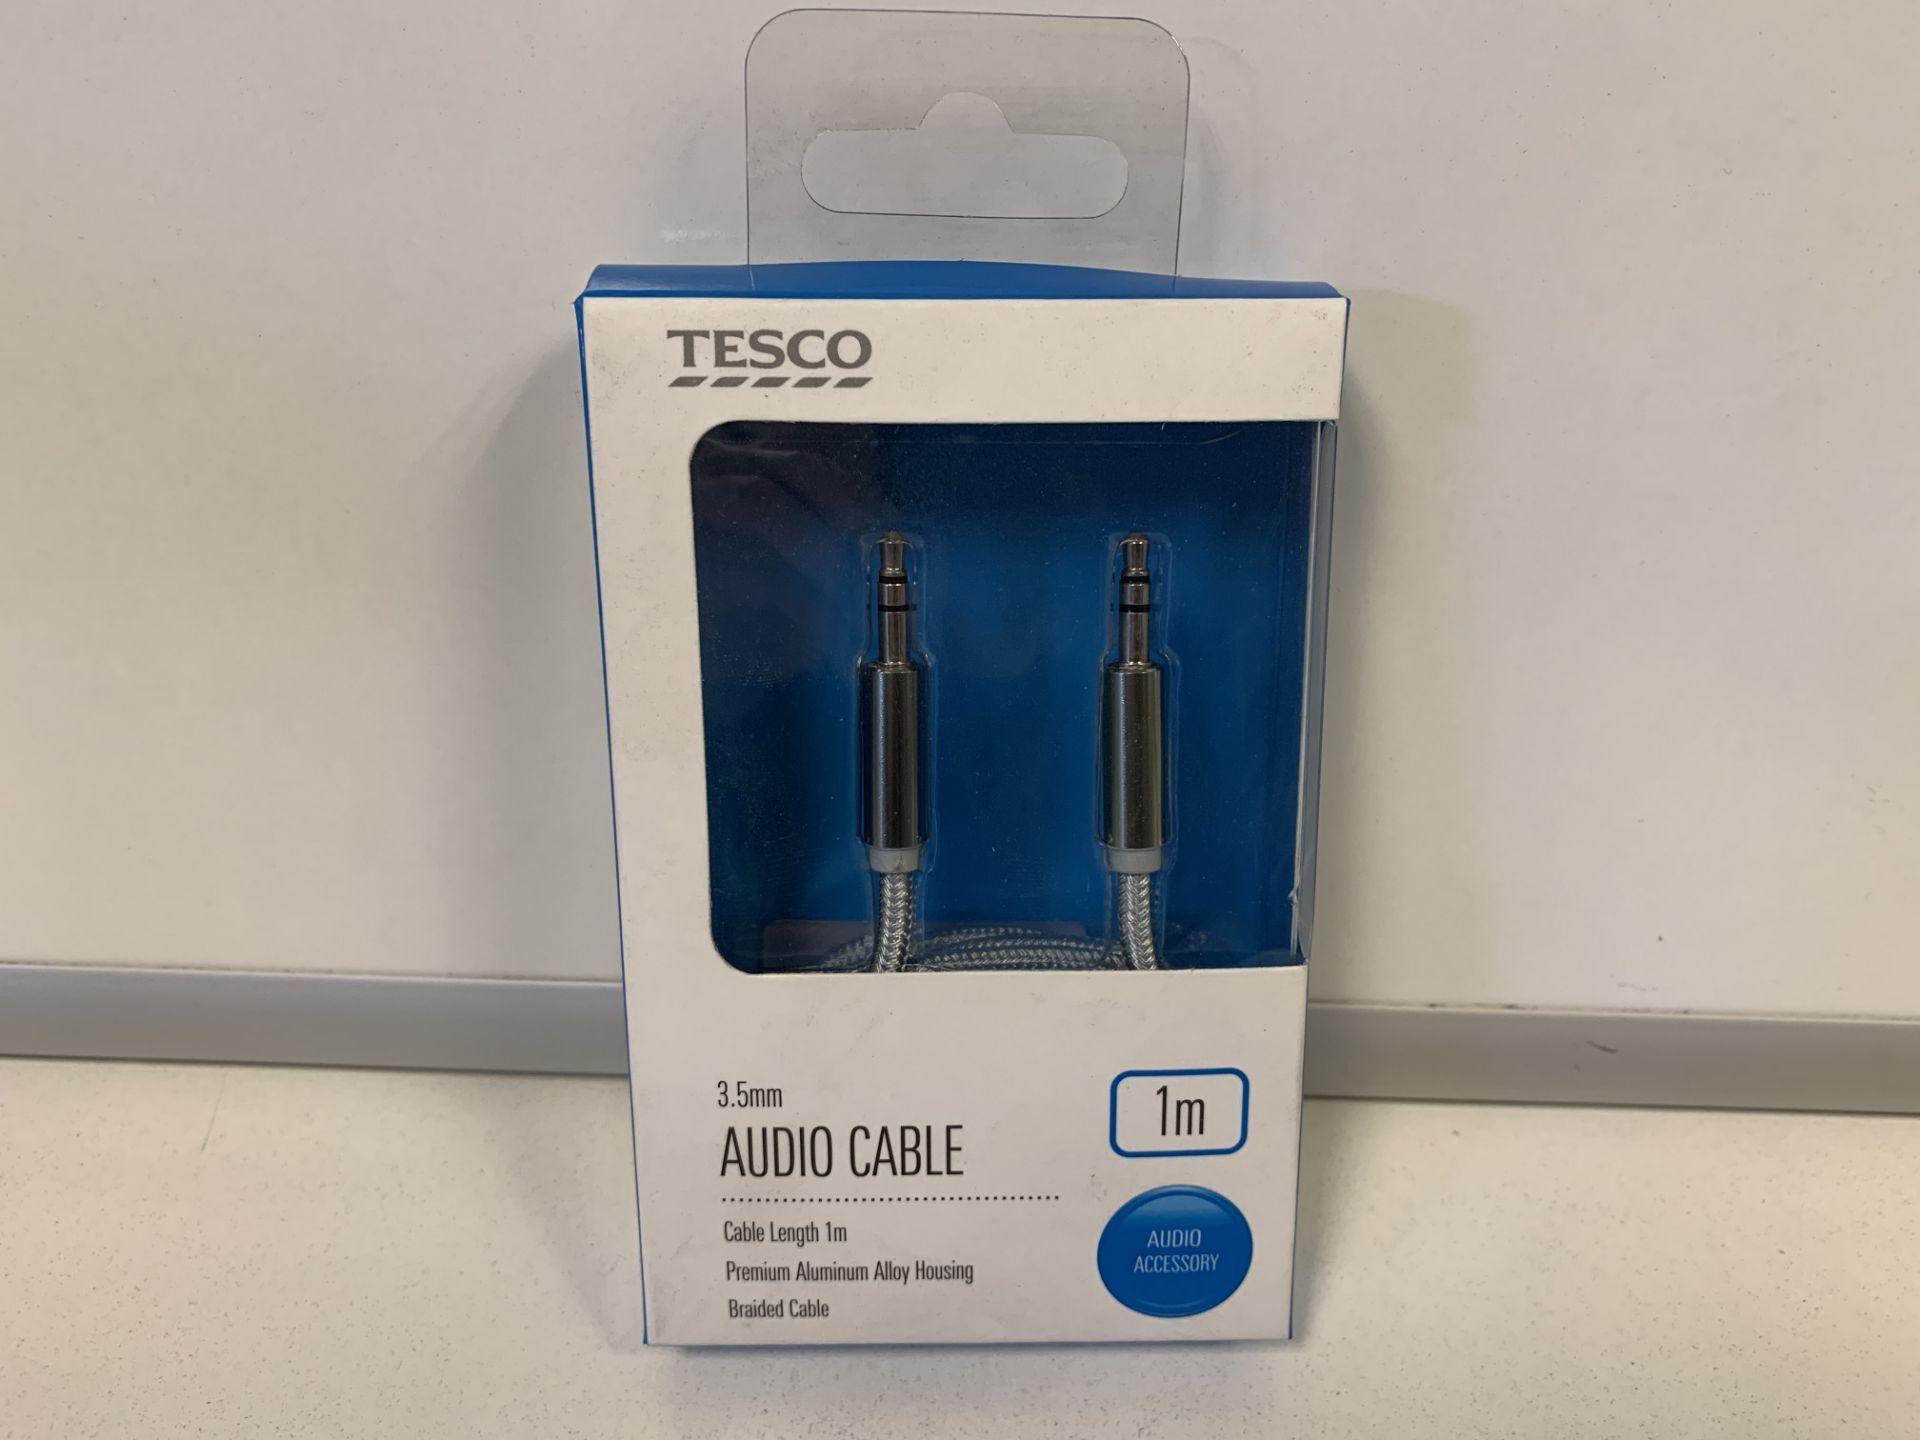 80 X BRAND NEW TESCO 3.5MM AUDIO CABLES 1M IN 2 BOXES (198/23)